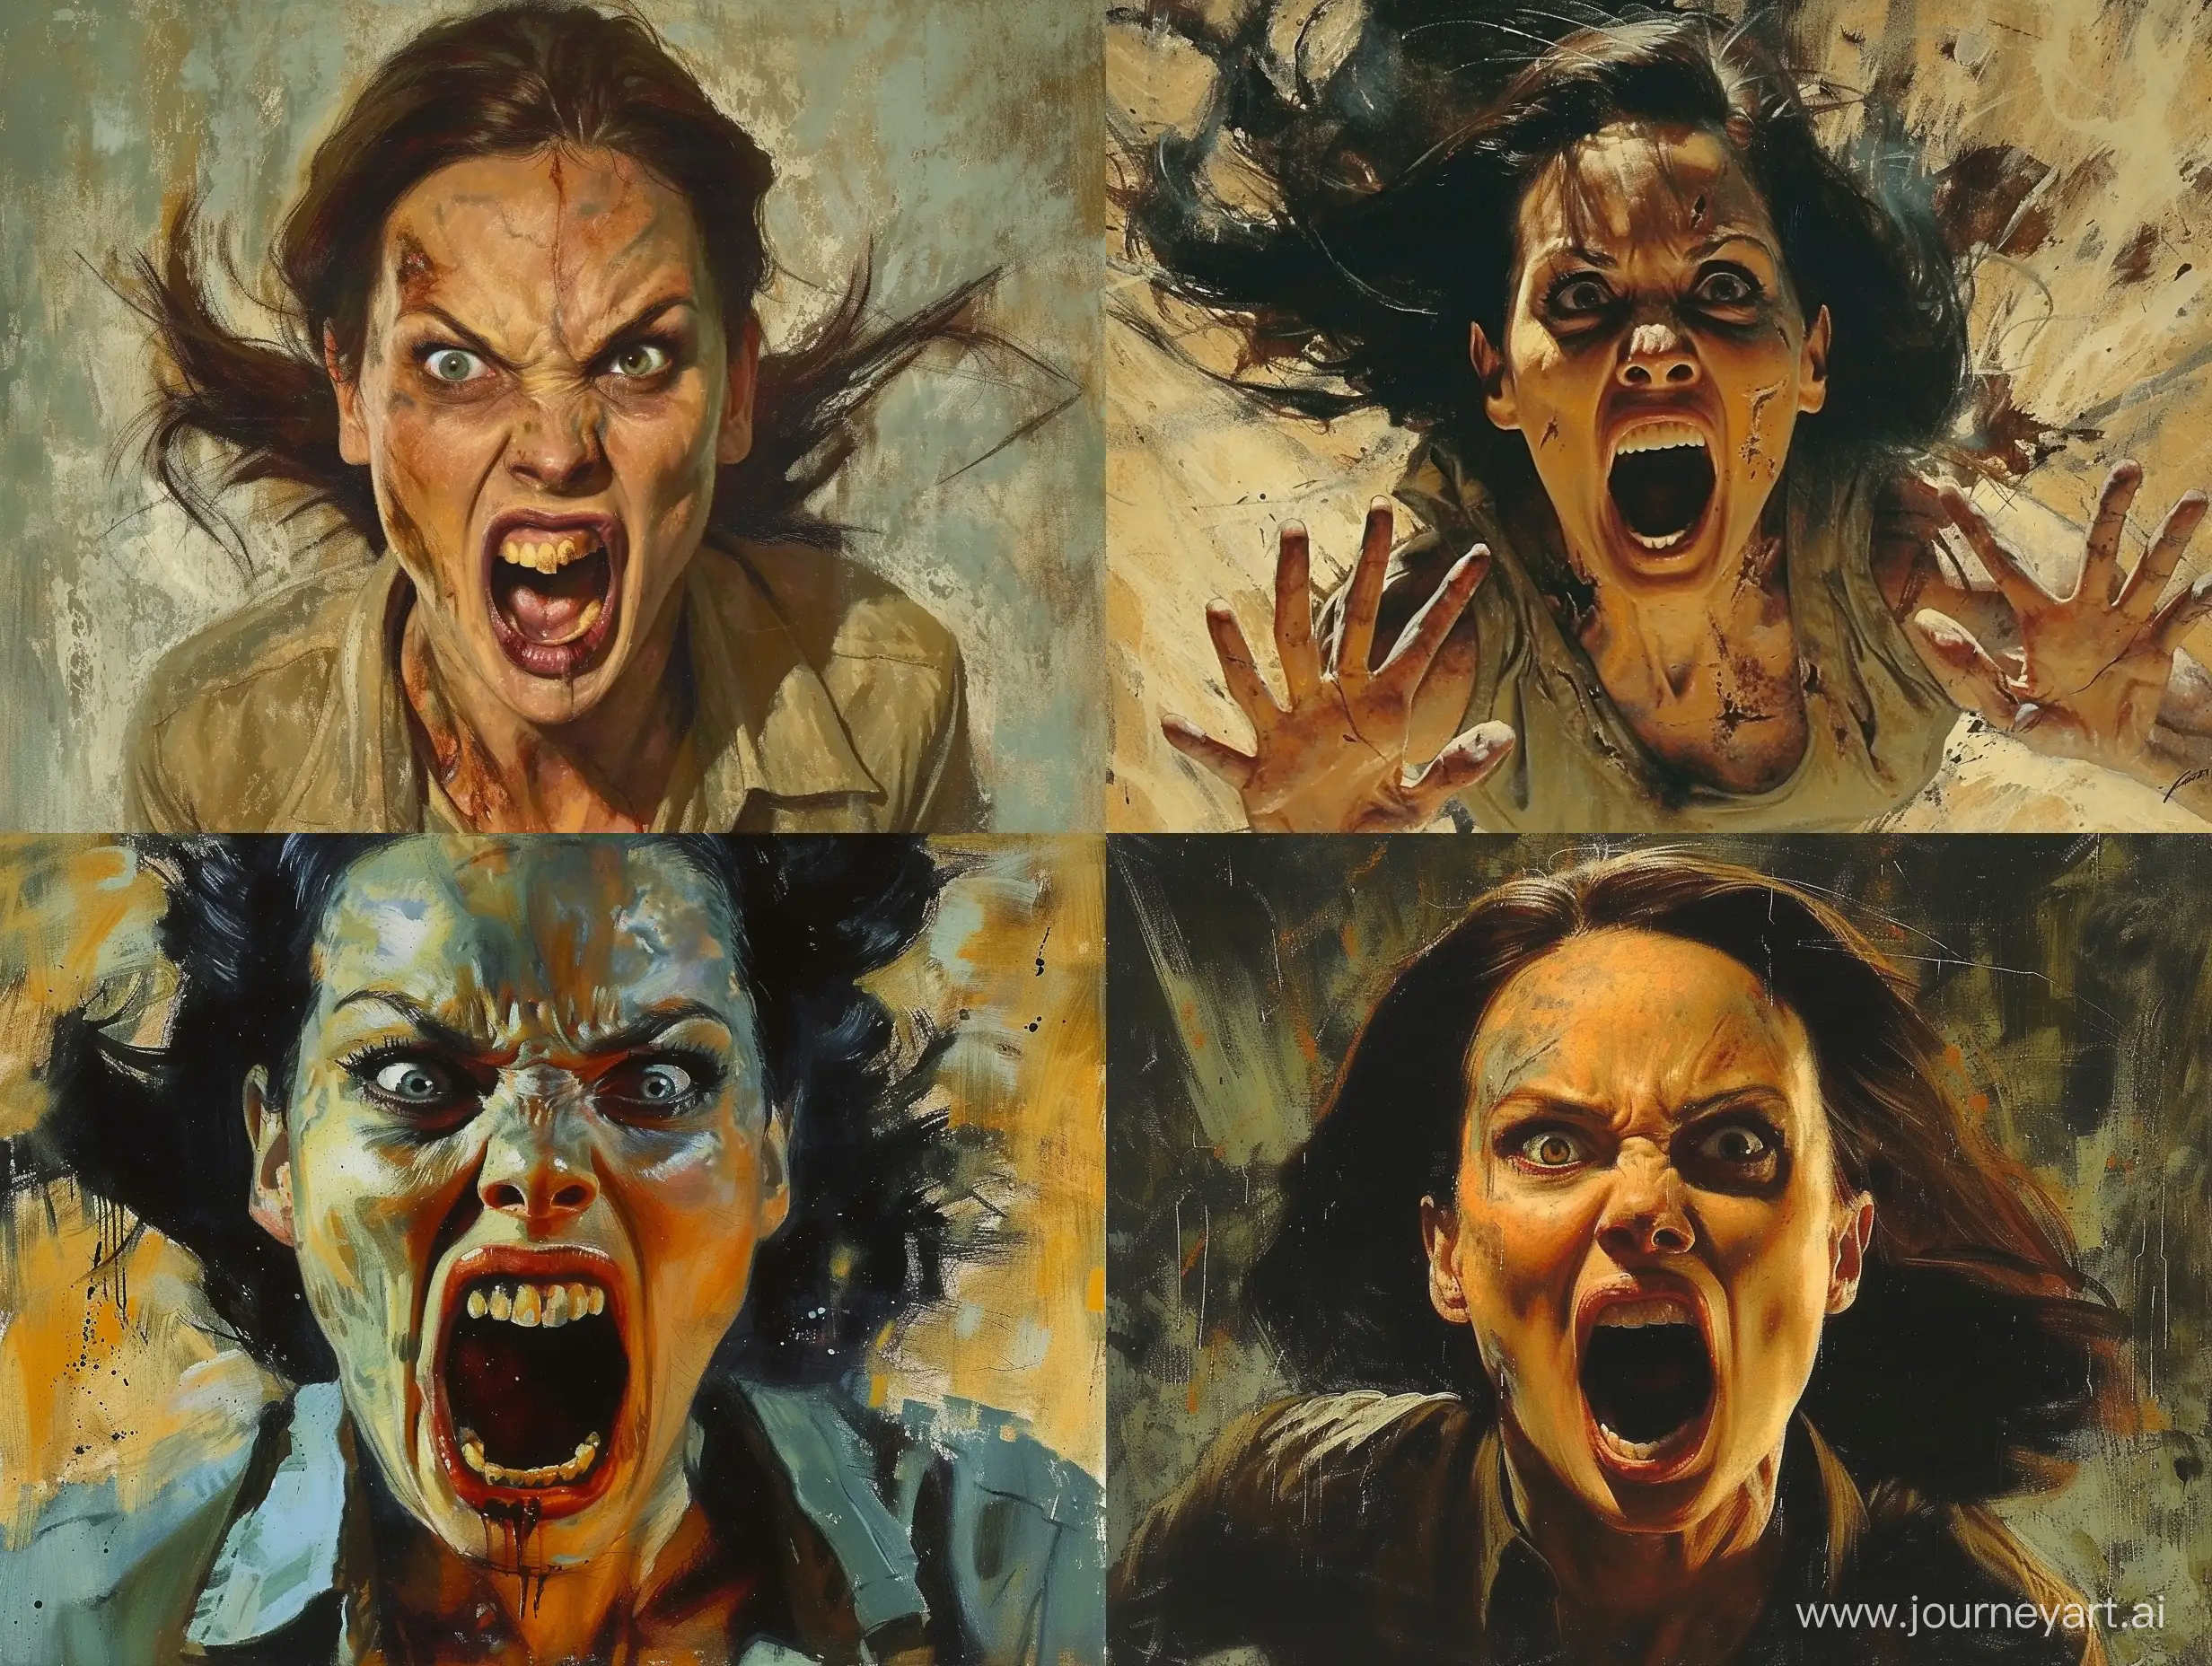 Angelina-Jolie-Transforms-into-a-Screaming-Zombie-A-Haunting-Artistic-Creation-by-Craig-Mullins-Leyendecker-and-Norman-Rockwell